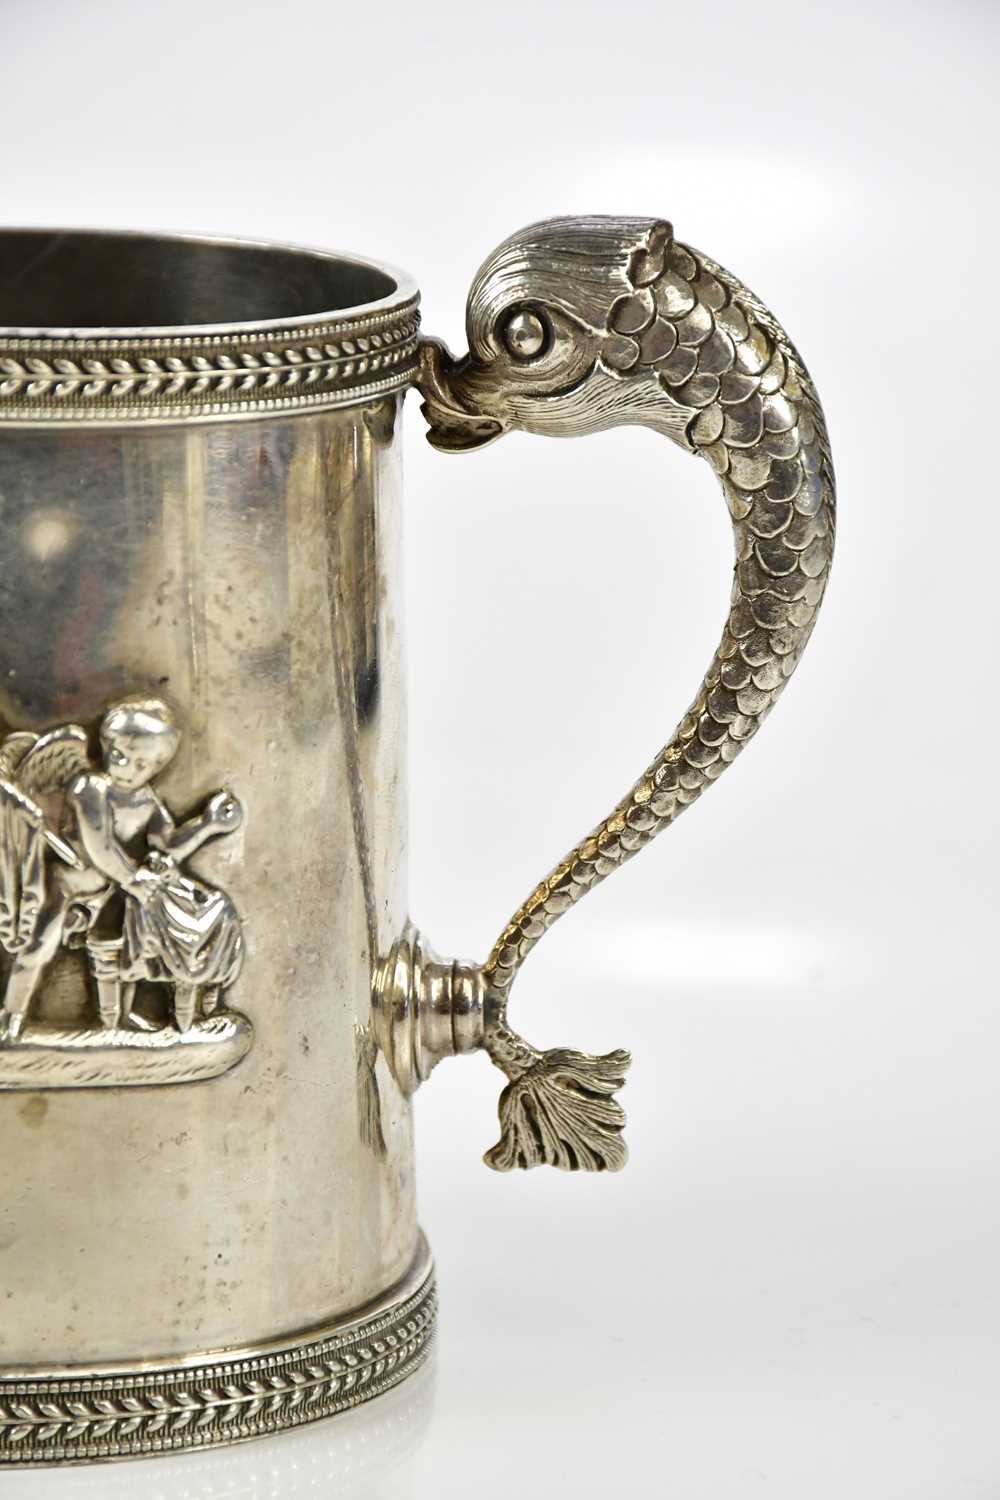 JOHN EMES; a George III hallmarked silver mug, with dolphin handle and cast borders within which - Image 4 of 6